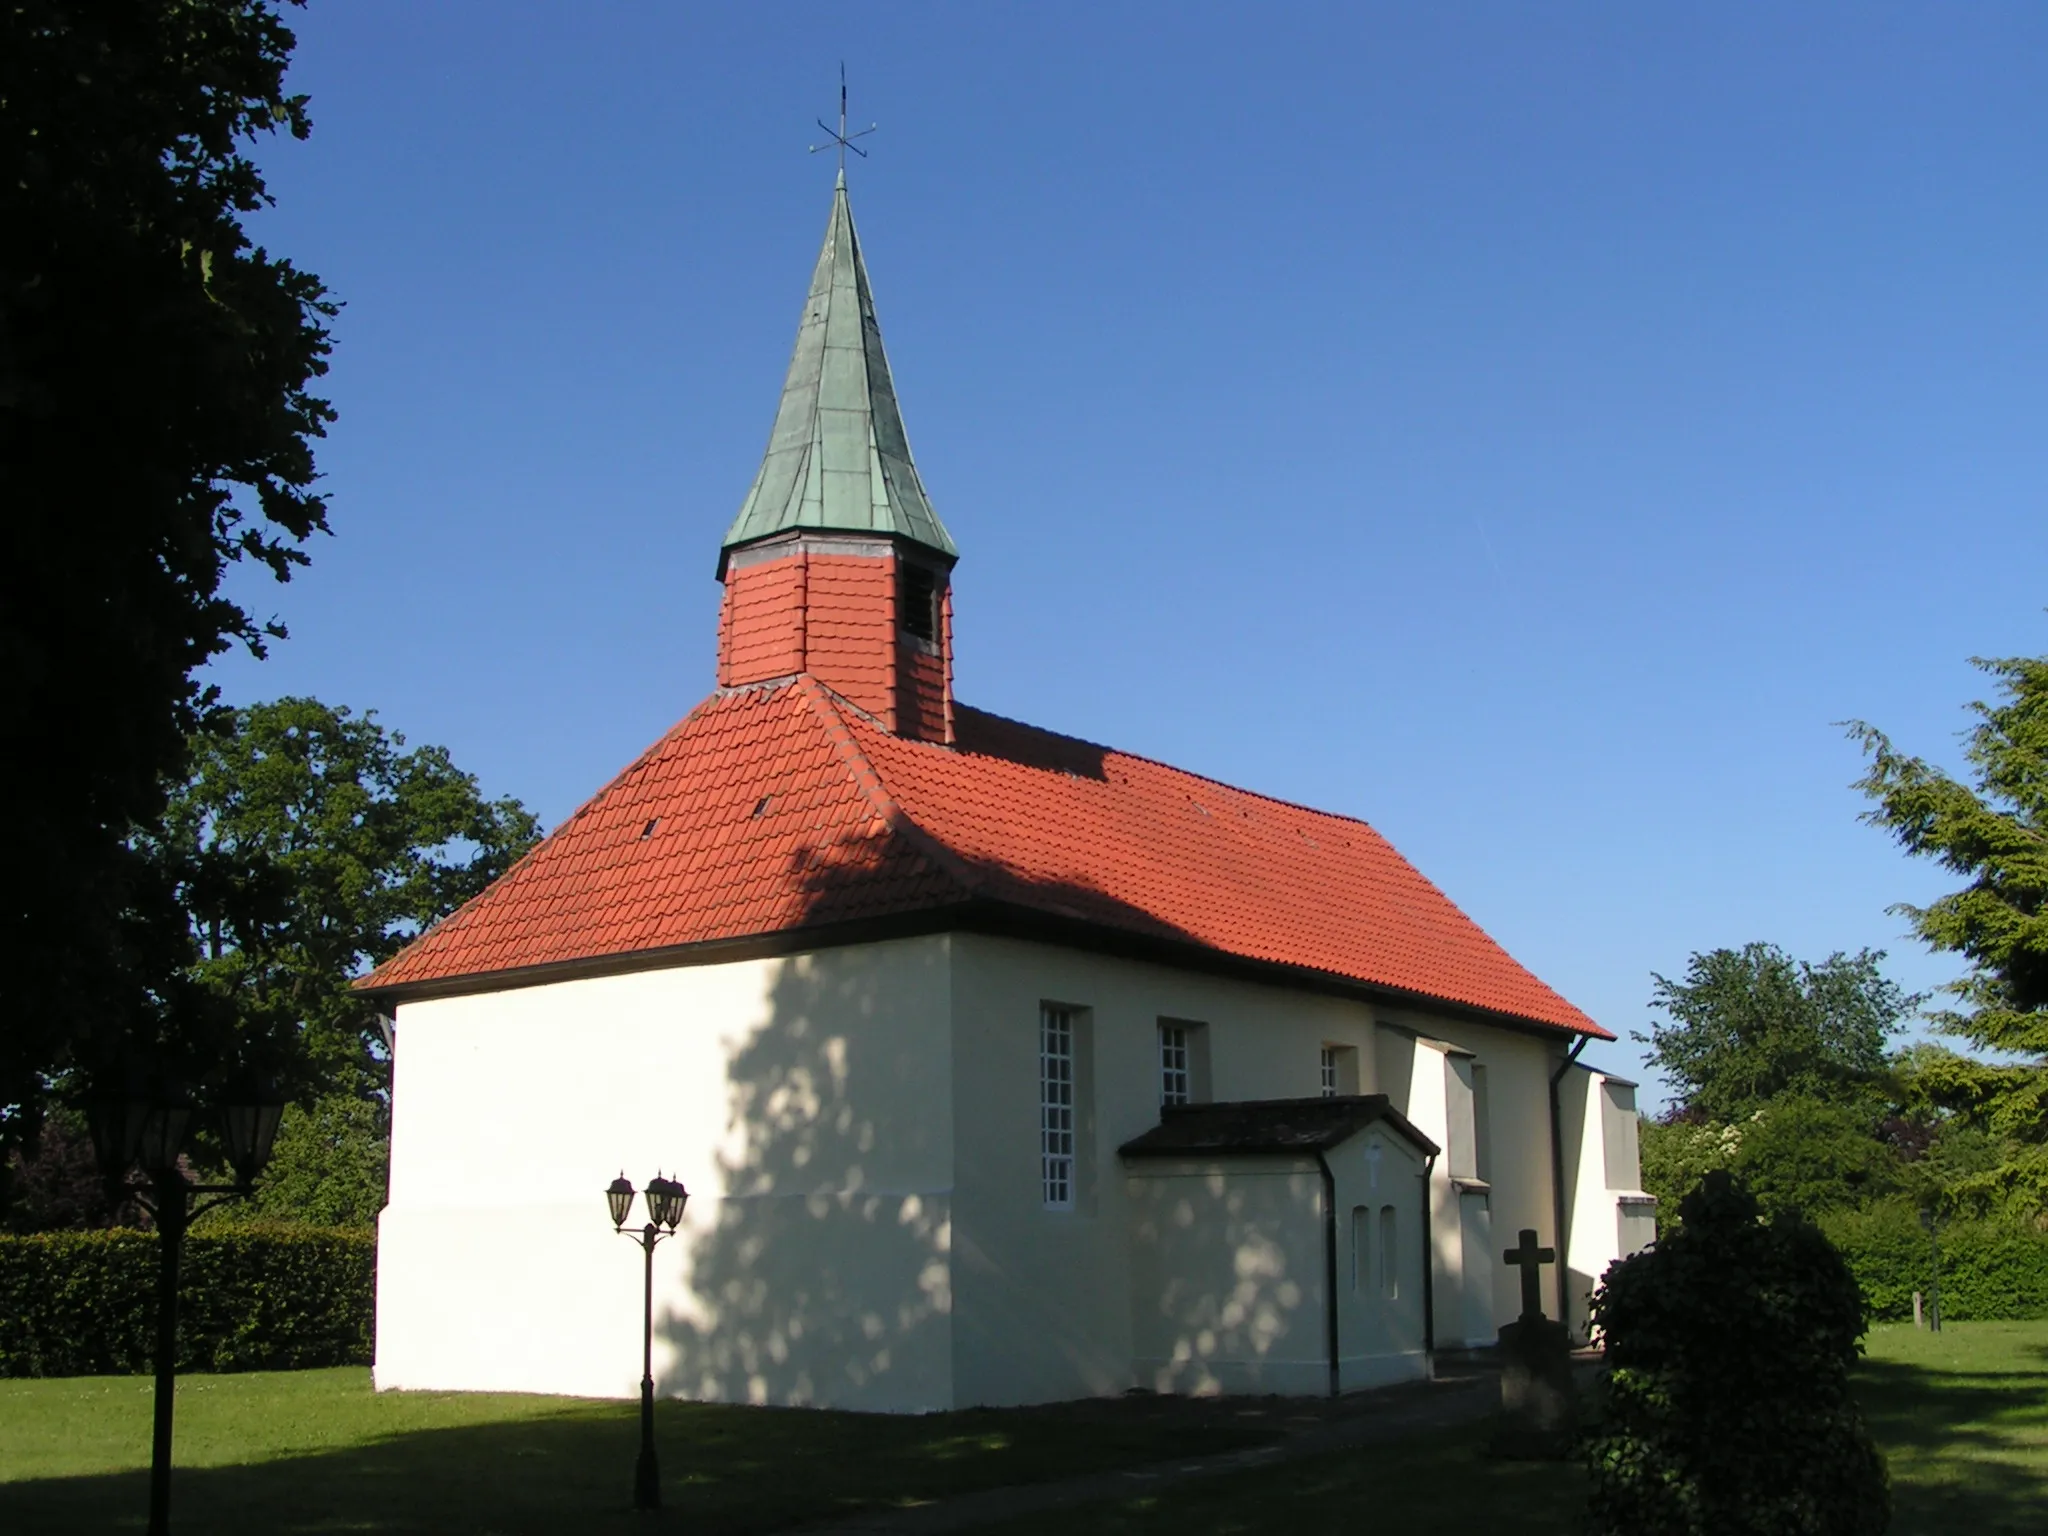 Photo showing: The lutheran church of Dudensen, a small village, belonging to the town Neustadt am Rübenberge in Germany, about 40 km northwest from Hannover.